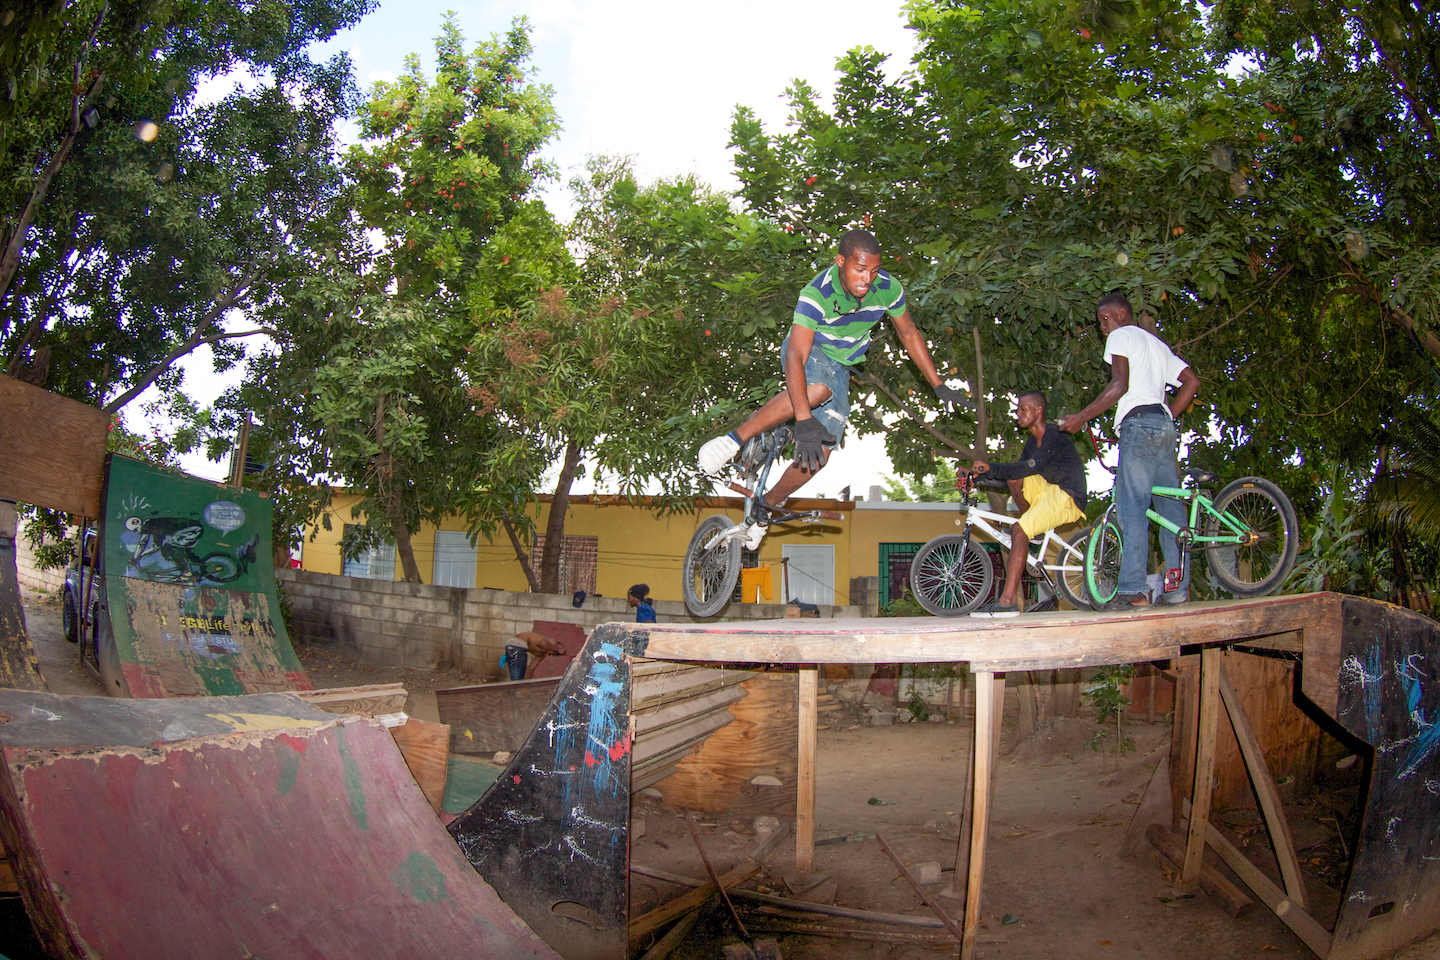 A man rides a black BMX on one front wheel over a wooden ramp.